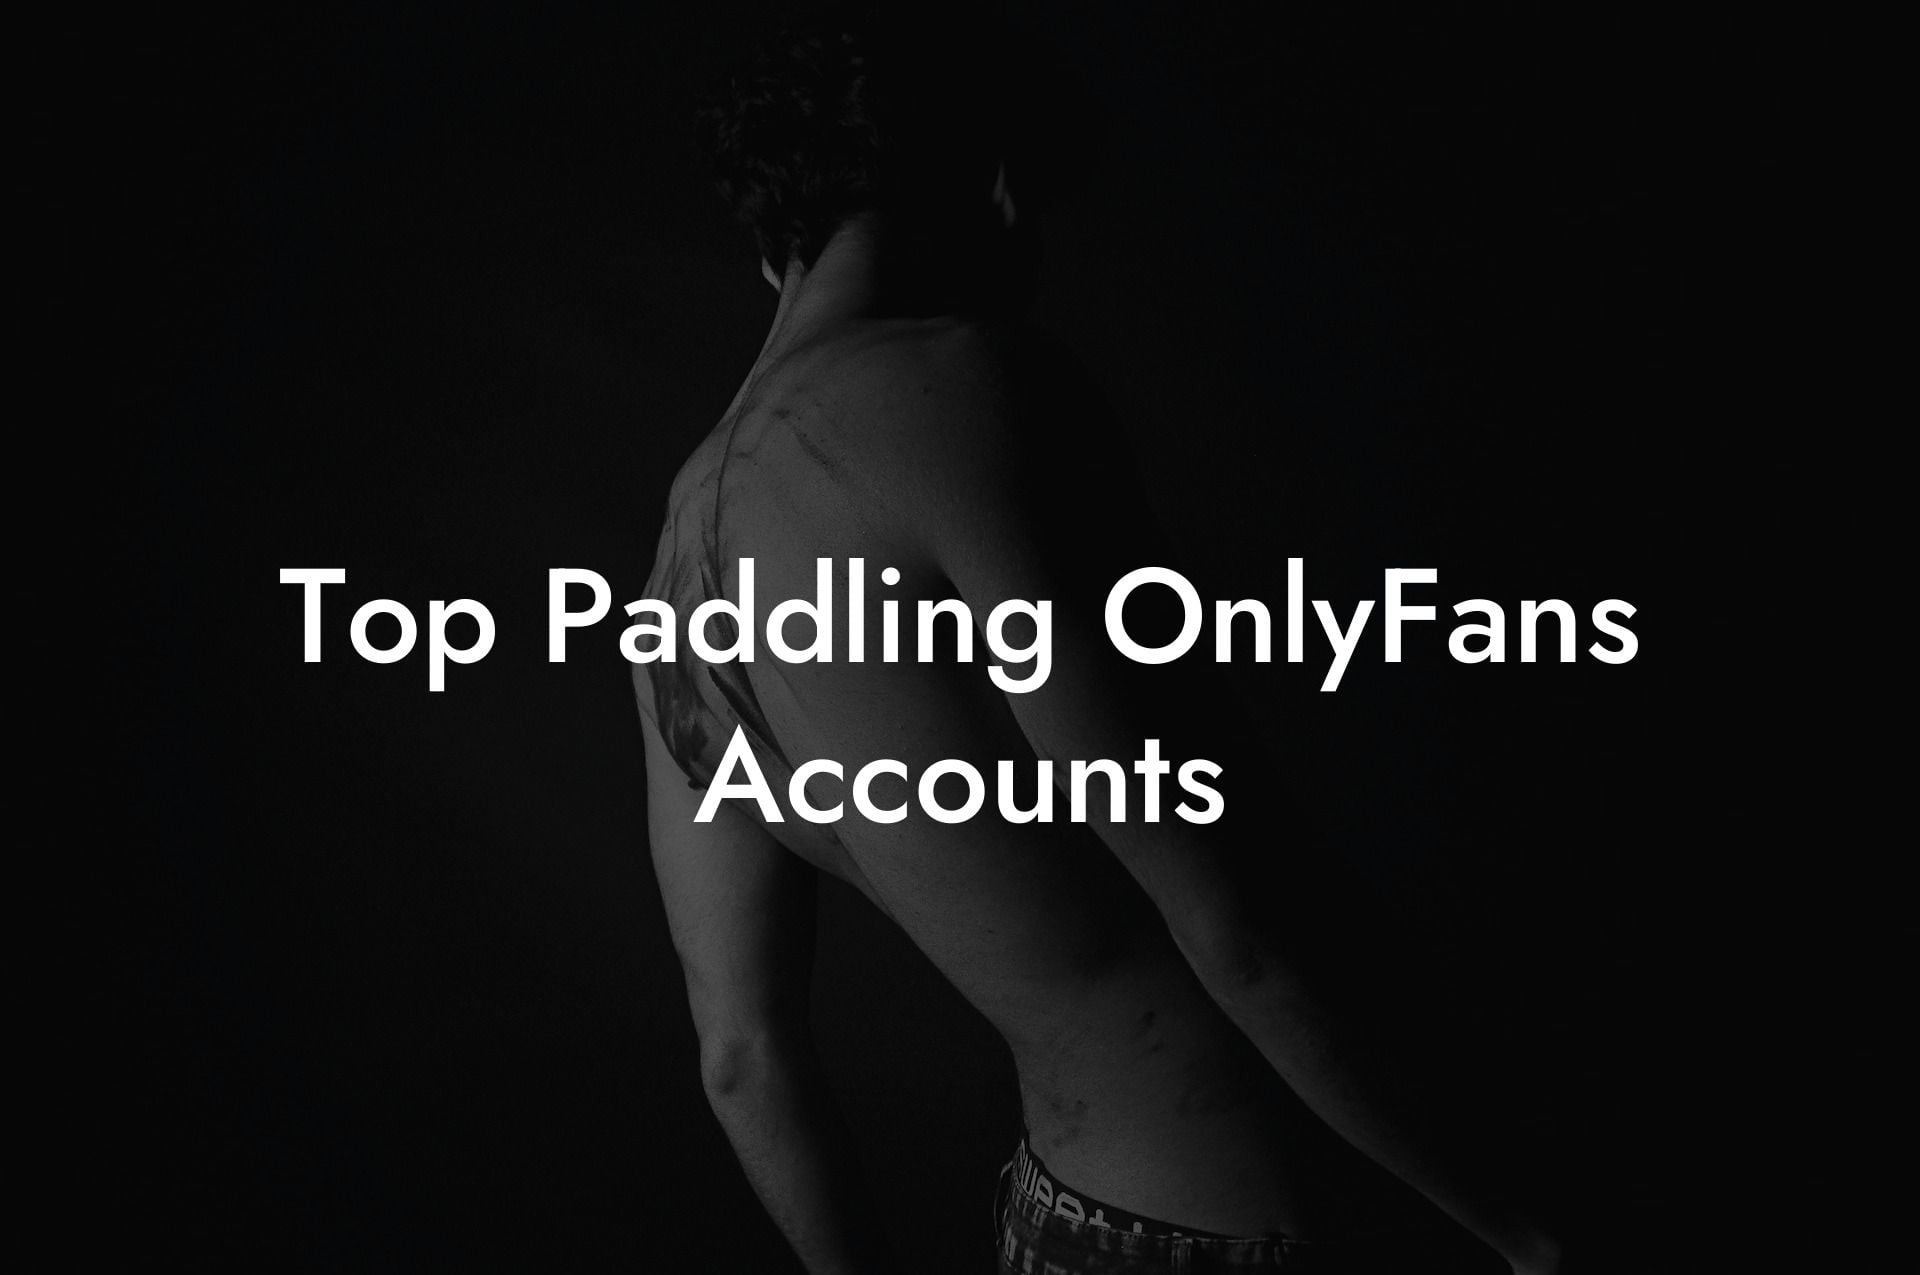 Top Paddling OnlyFans Accounts